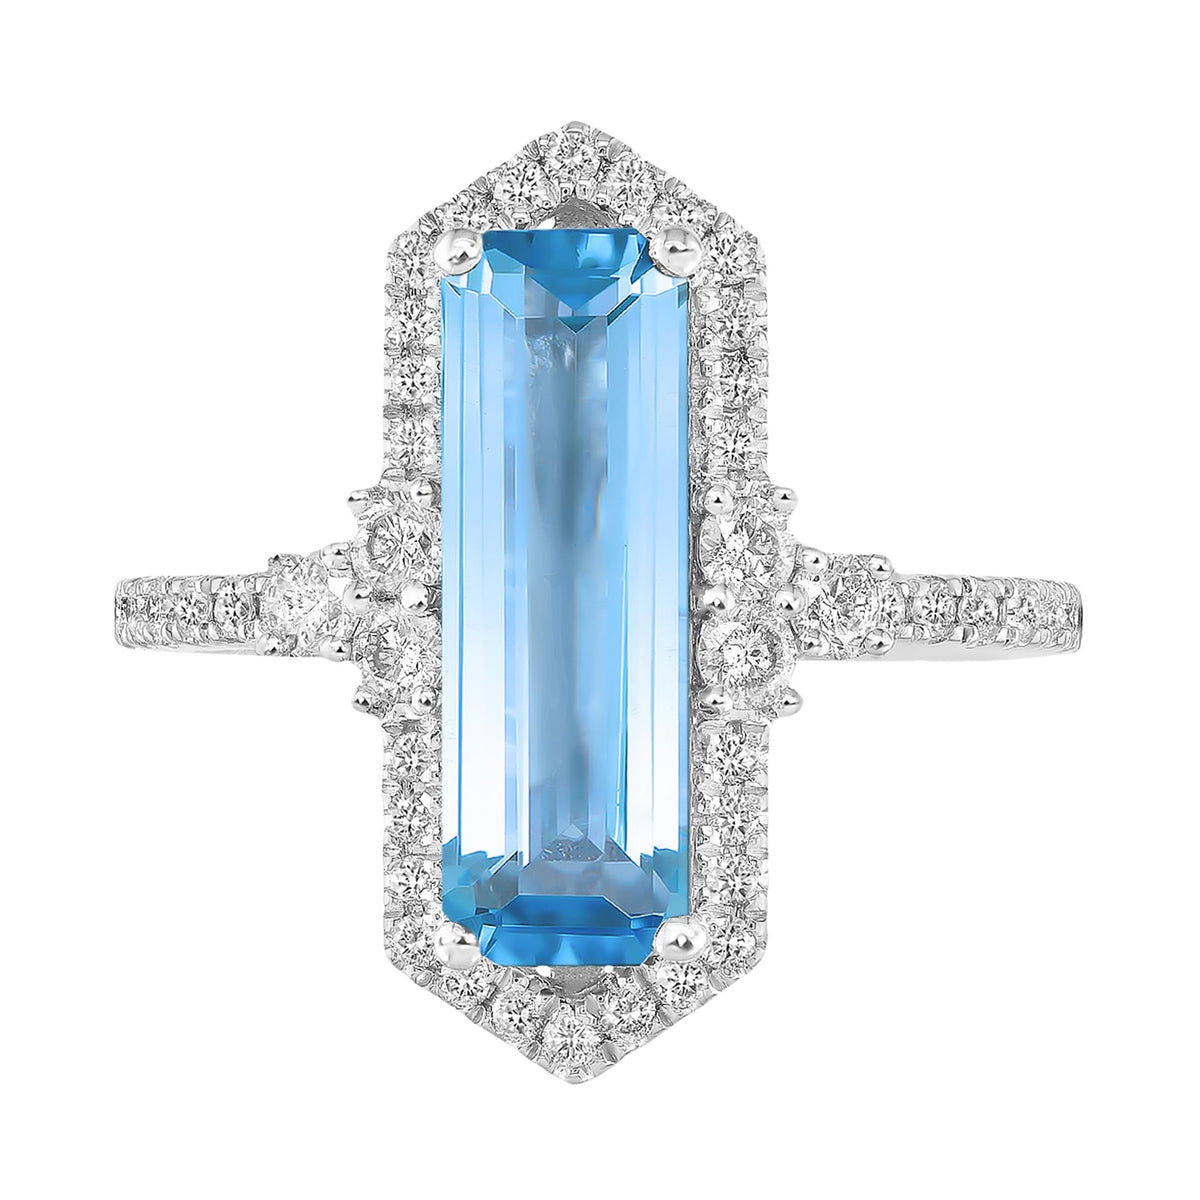 14Kt White Gold Halo Gemstone Ring With 3.07ct Blue Topaz